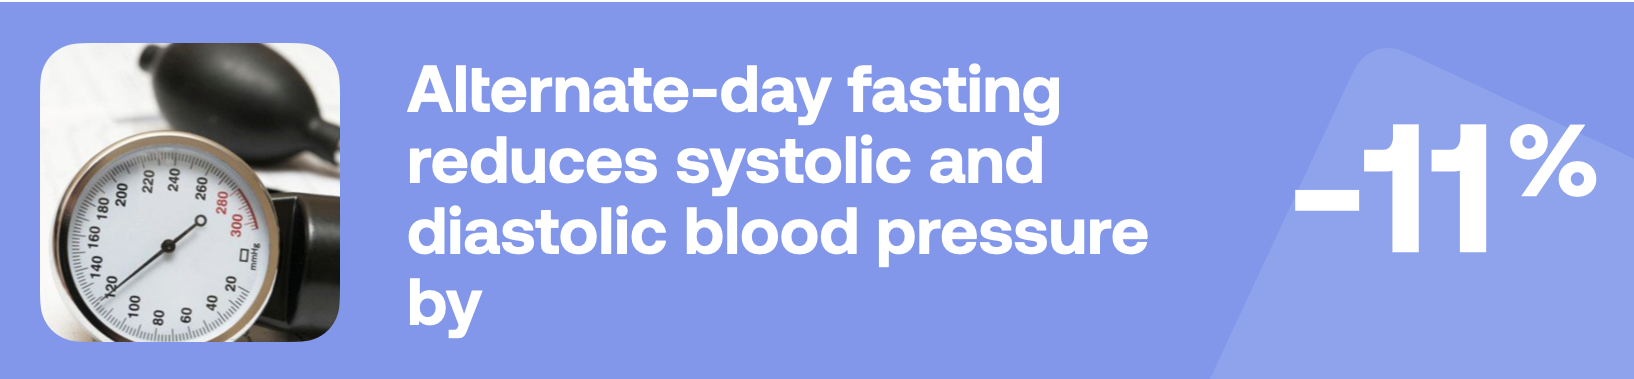 Alternate-day fasting reduces systolic and diastolic blood pressure by 11%